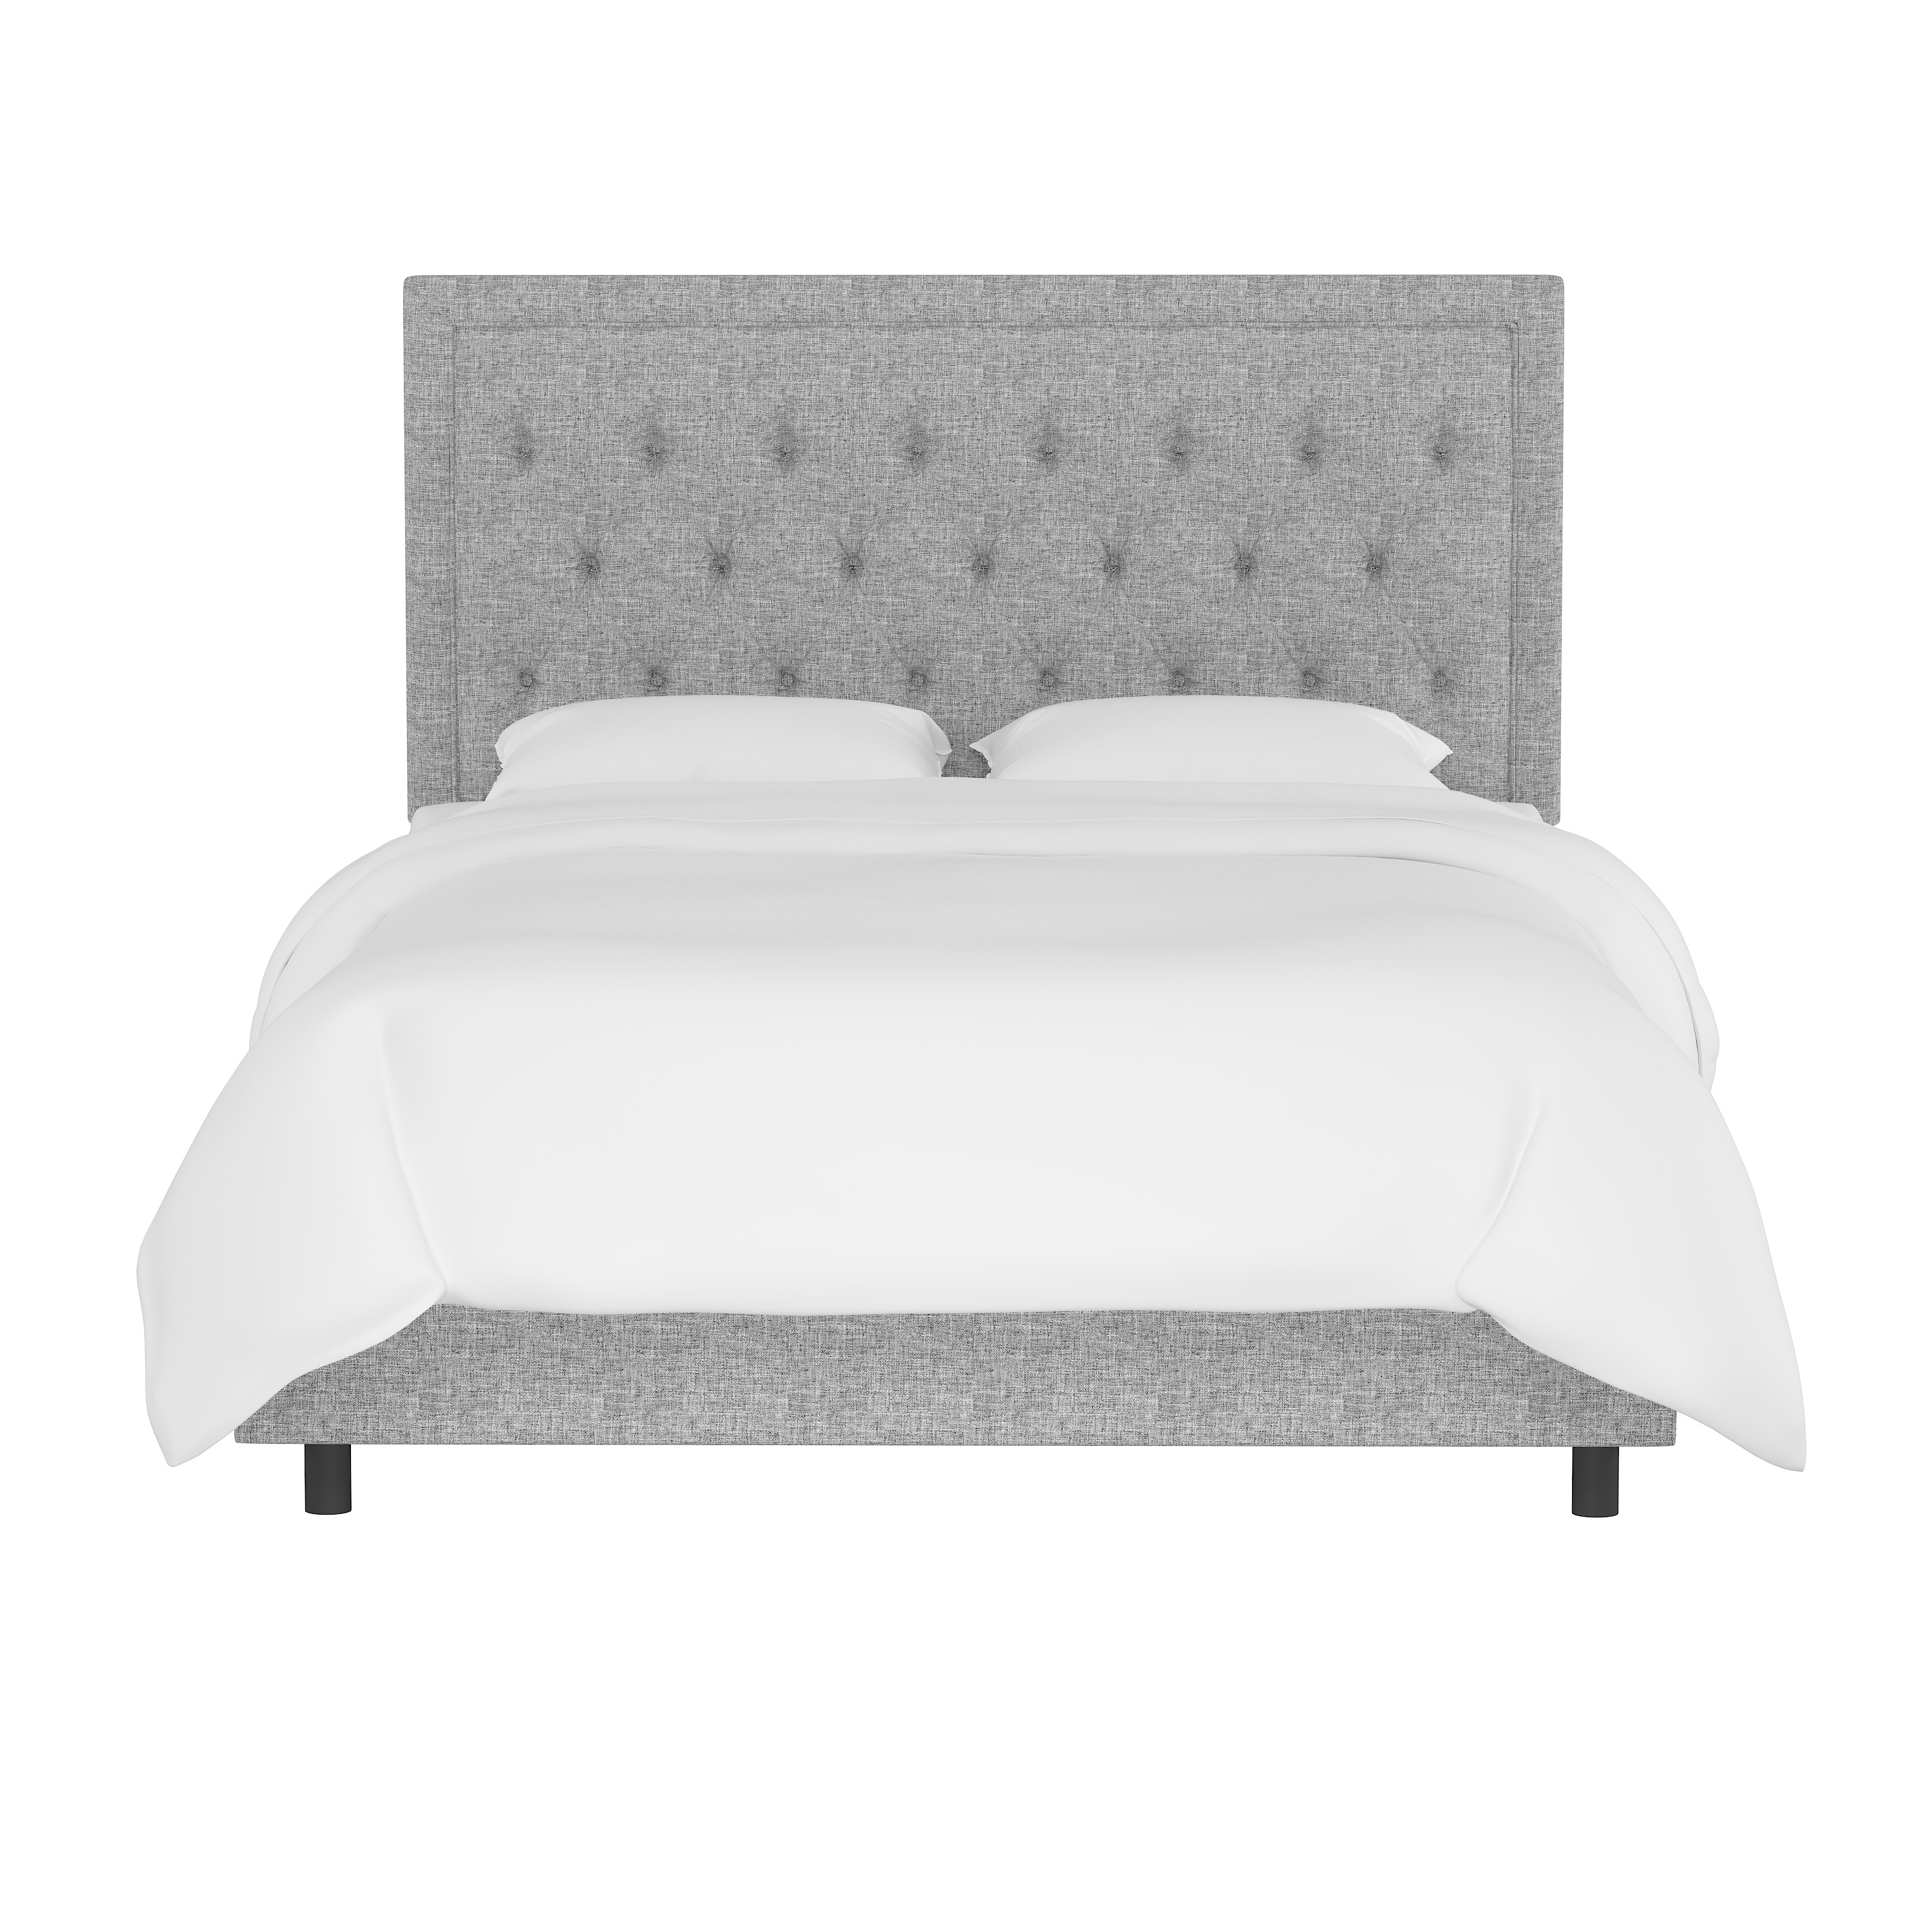 Lafayette Bed, King, Pumice - Image 1